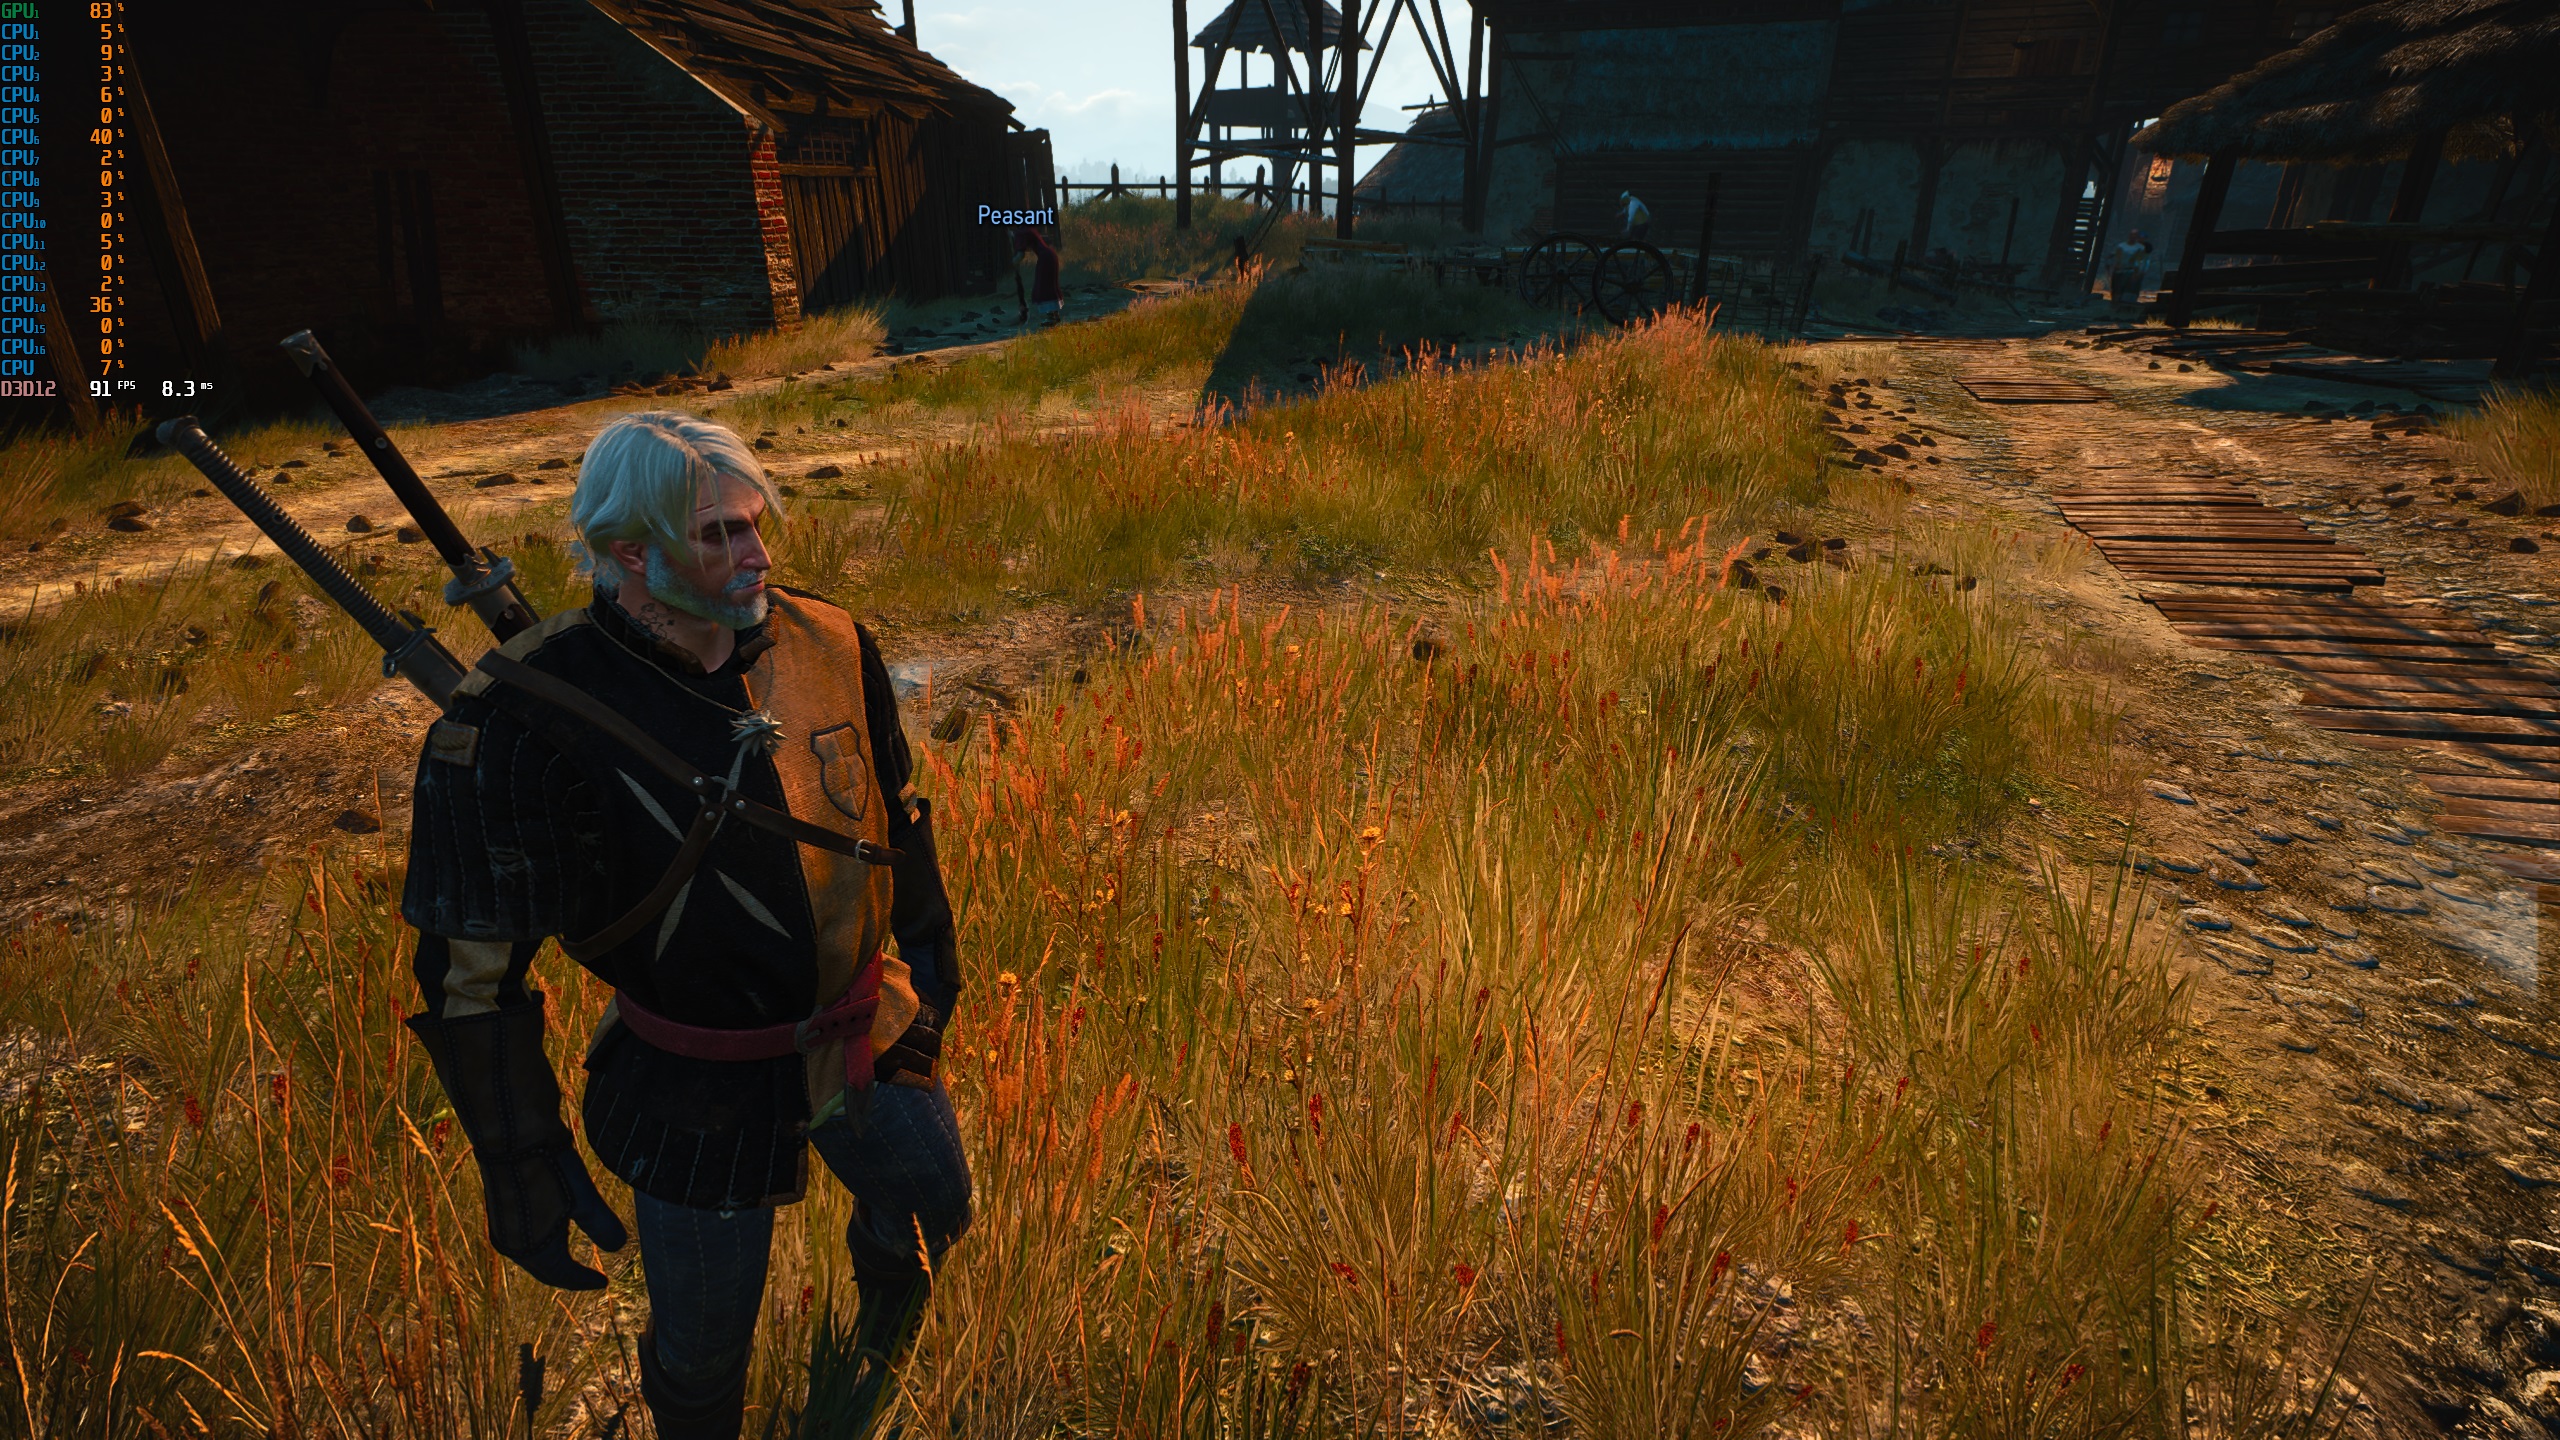 <div>I can finally enjoy The Witcher 3 again now that they've fixed the grass shadows</div>